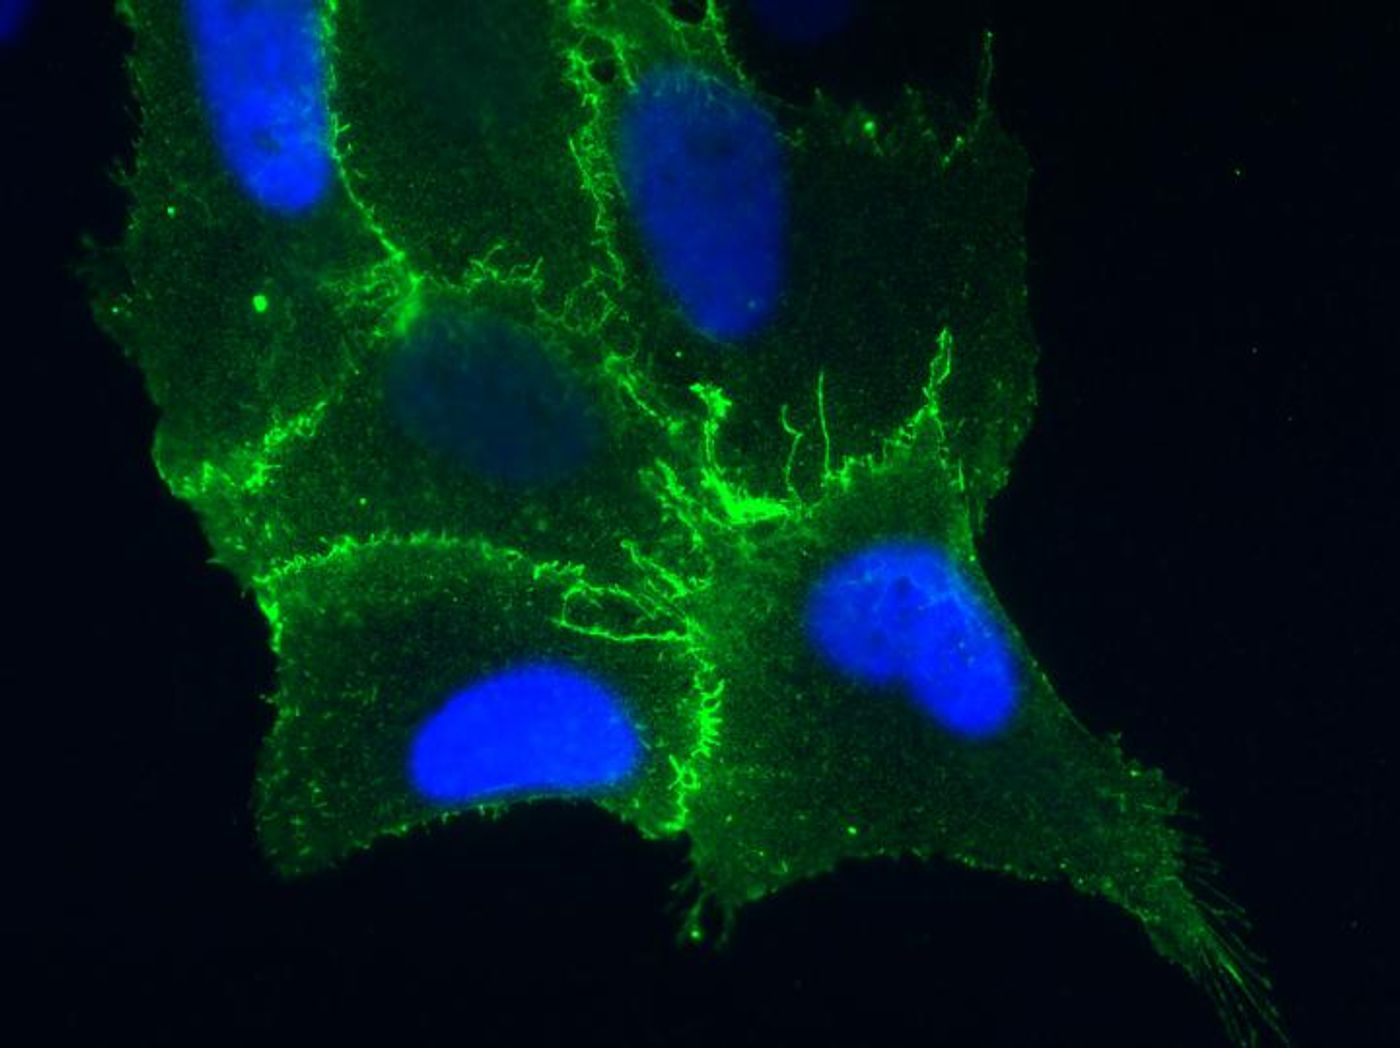 This cell from the lining of the lung is expressing the protein receptor PCDH1 (in blue), which is found on cell membranes. / Credit: Albert Einstein College of Medicine